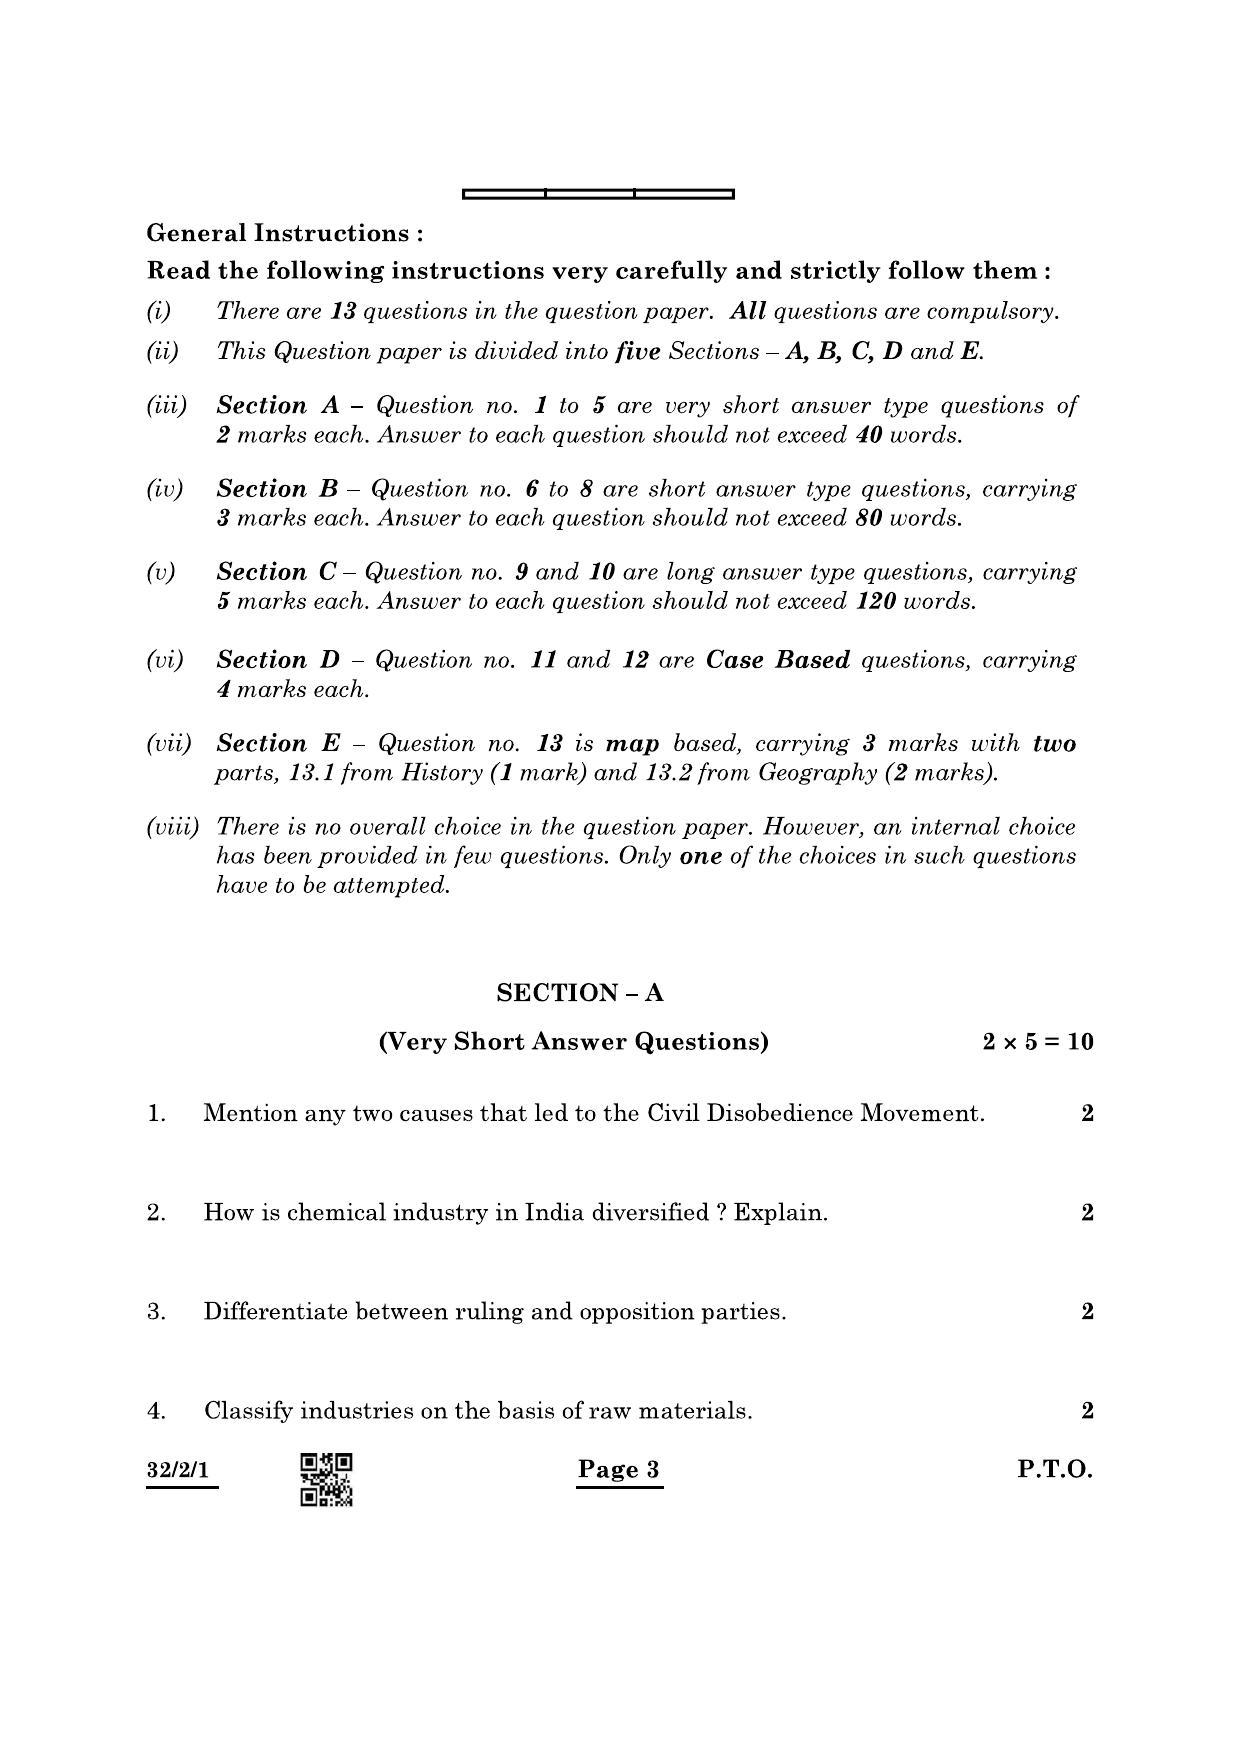 CBSE Class 10 32-2-1 Social Science 2022 Question Paper - Page 3